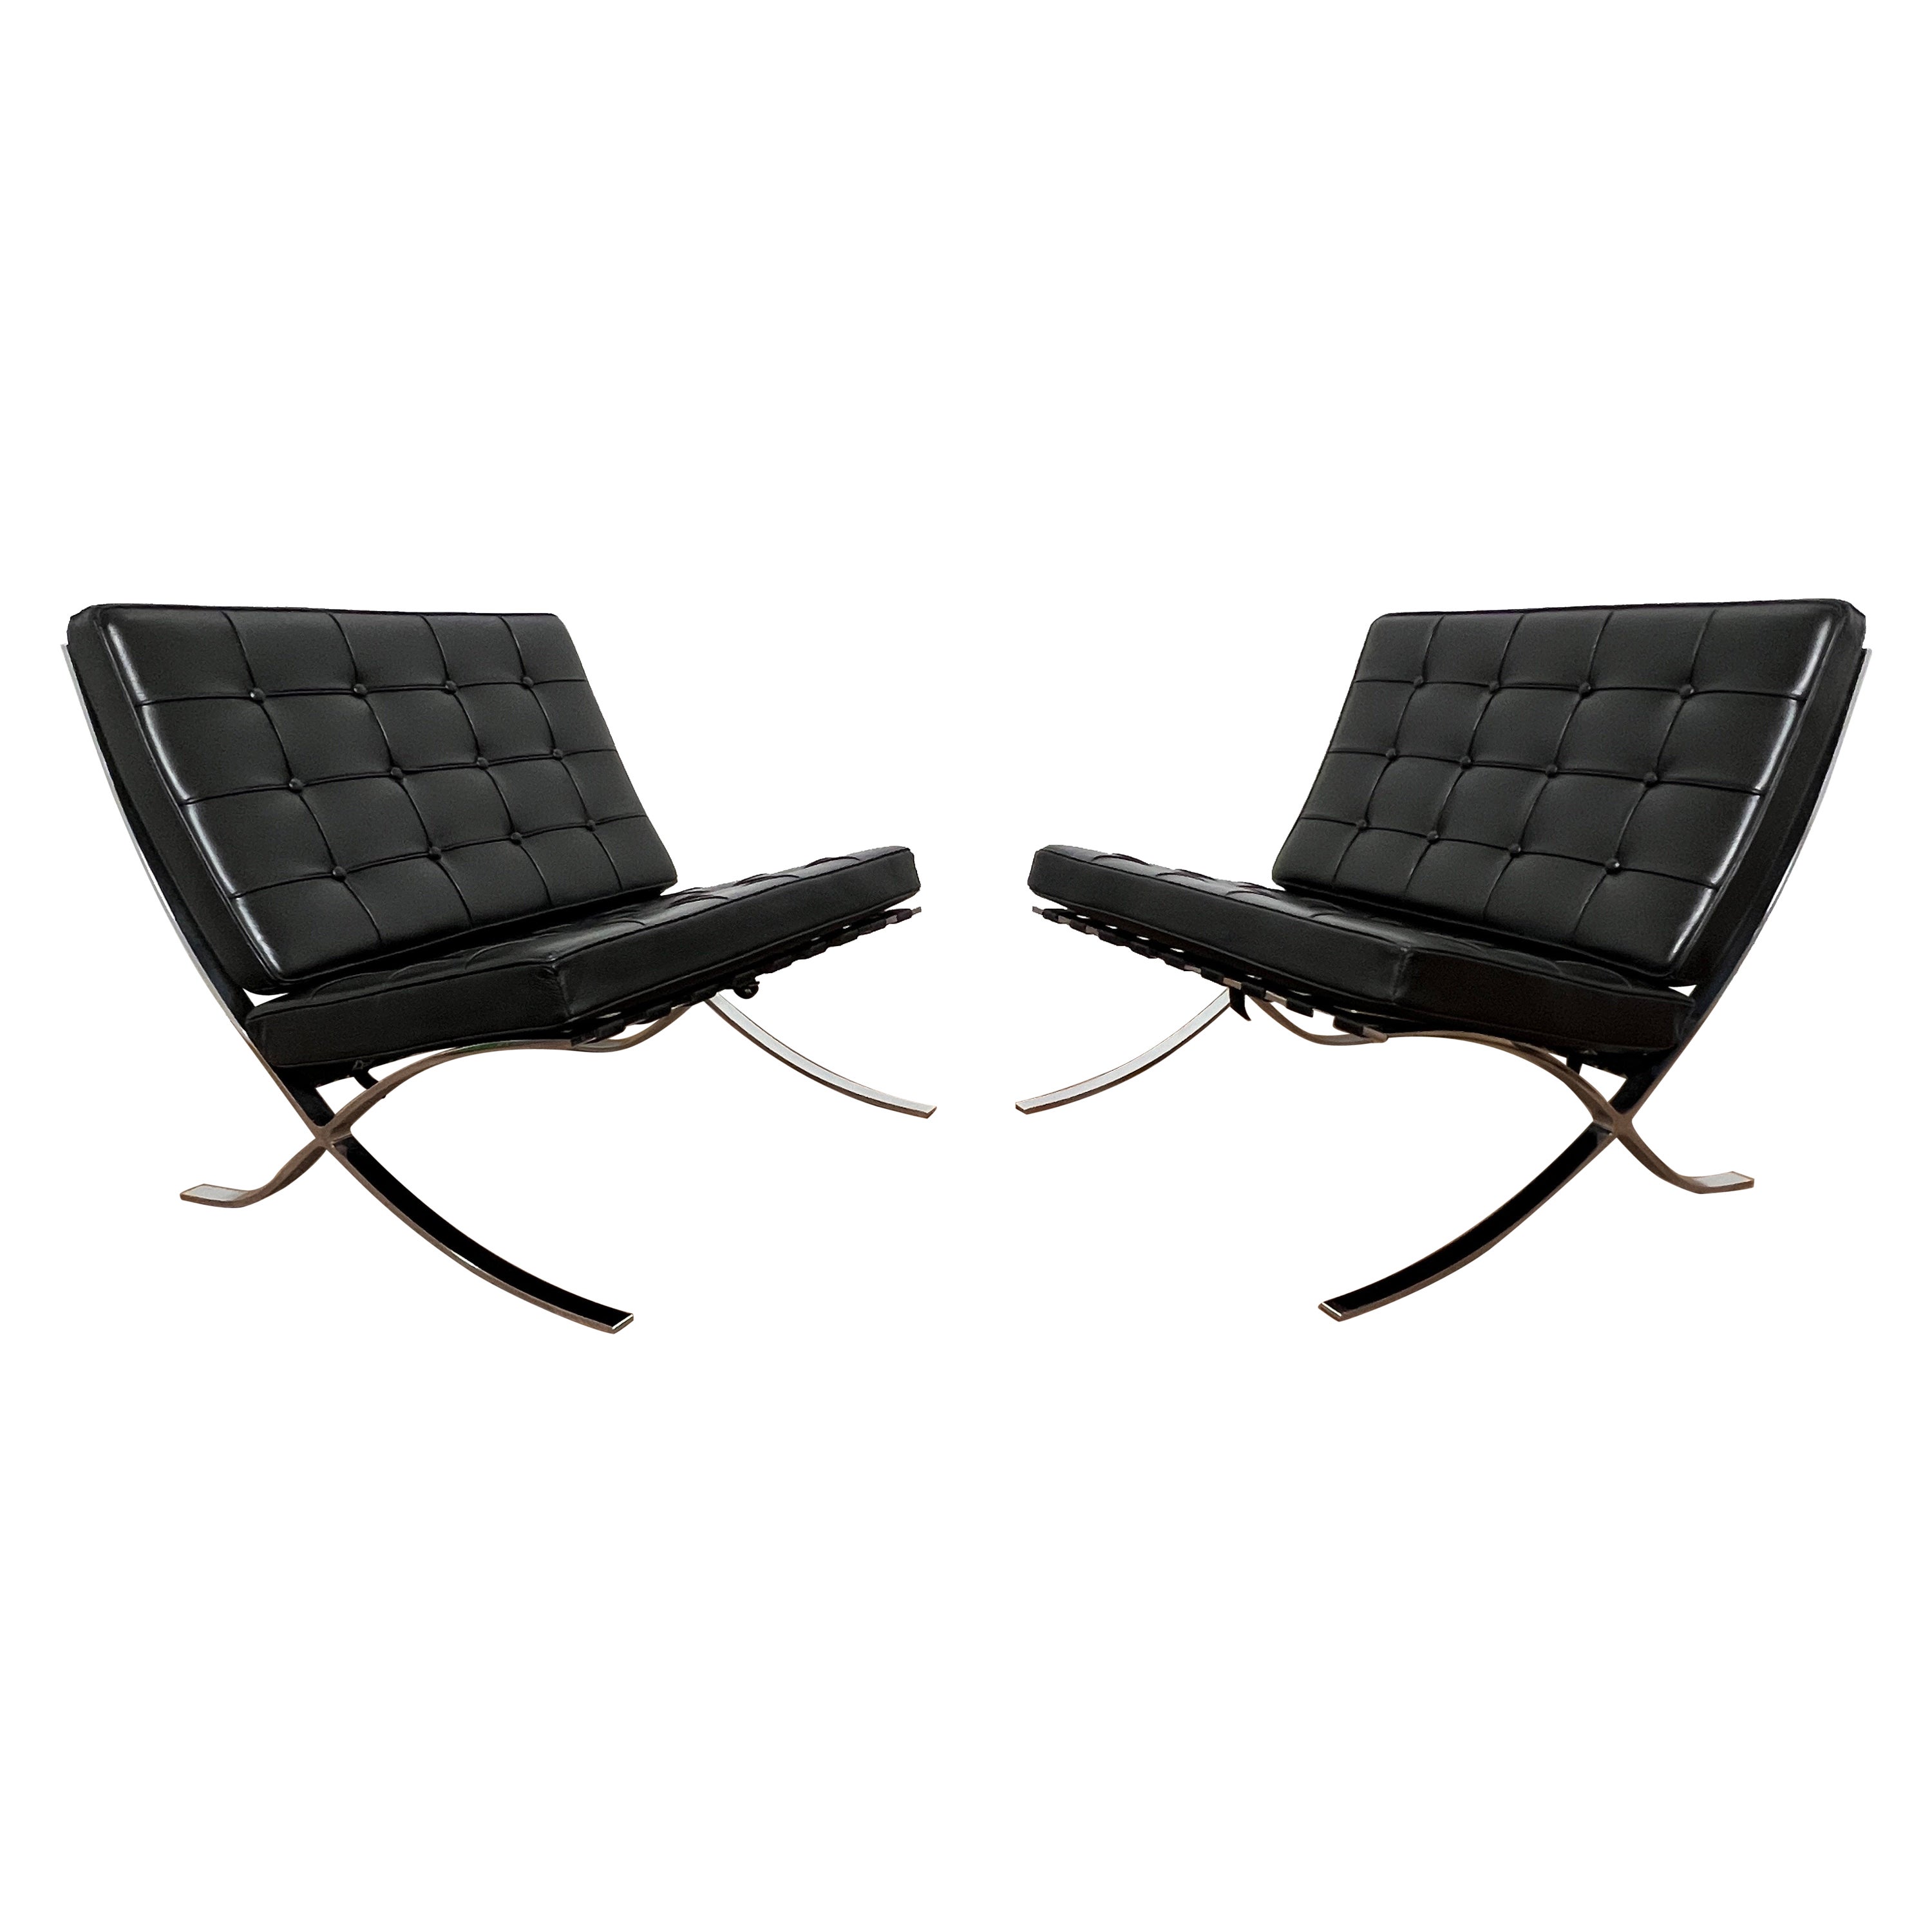 Pair of Italian Barcelona Leather Lounge Chairs by Gordon International C. 1990s For Sale